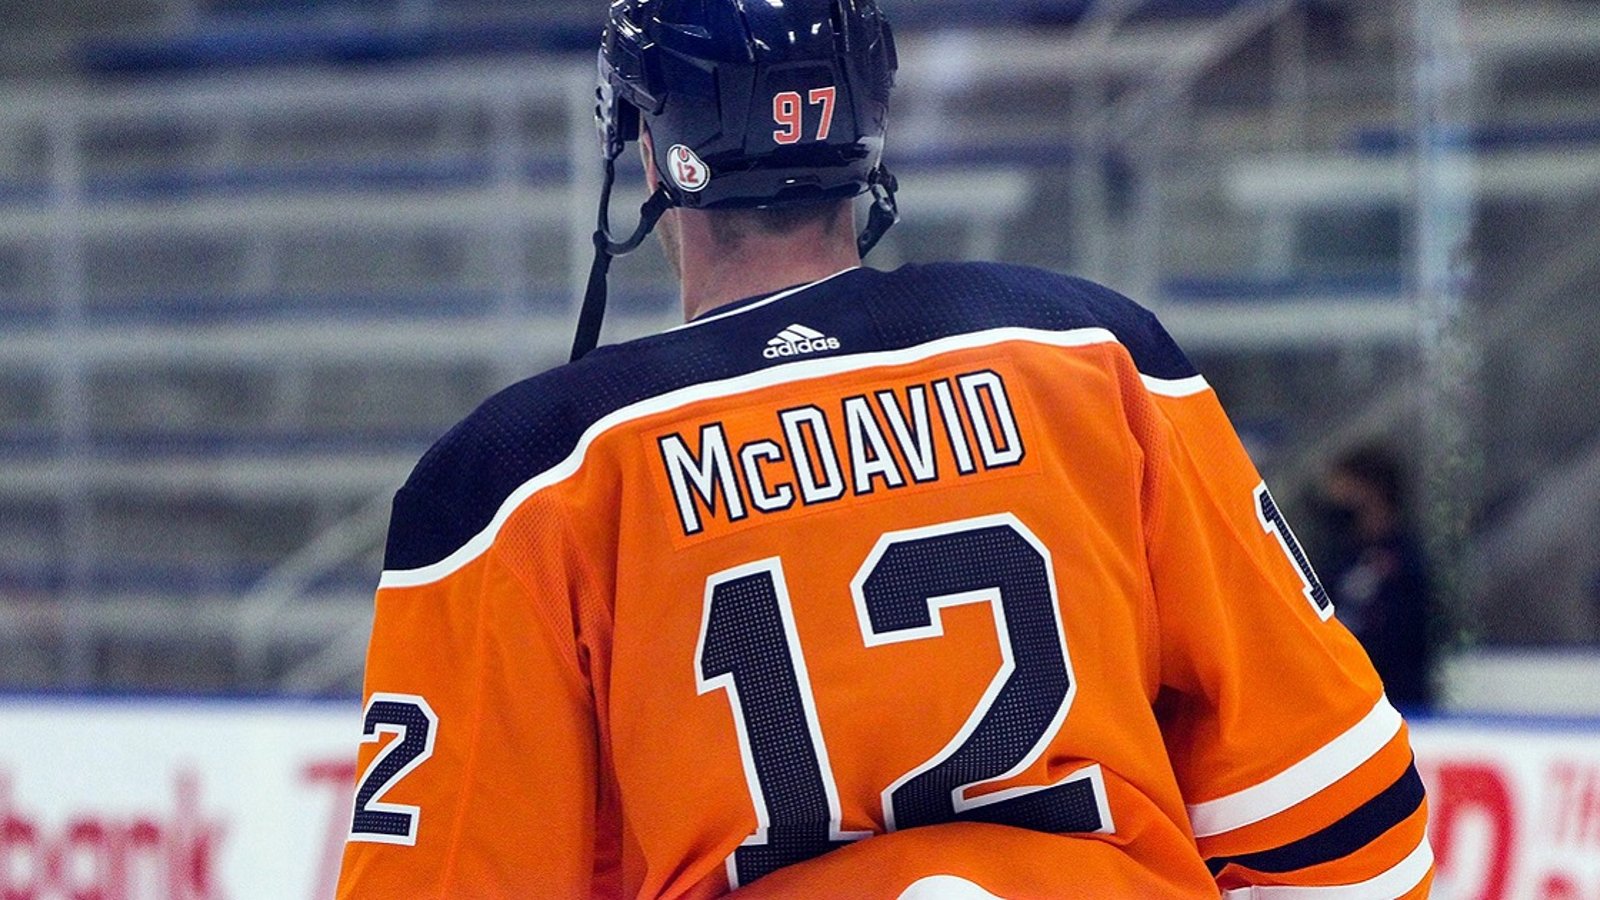 Connor McDavid rips the NHL for disrespecting Colby Cave's memorial.